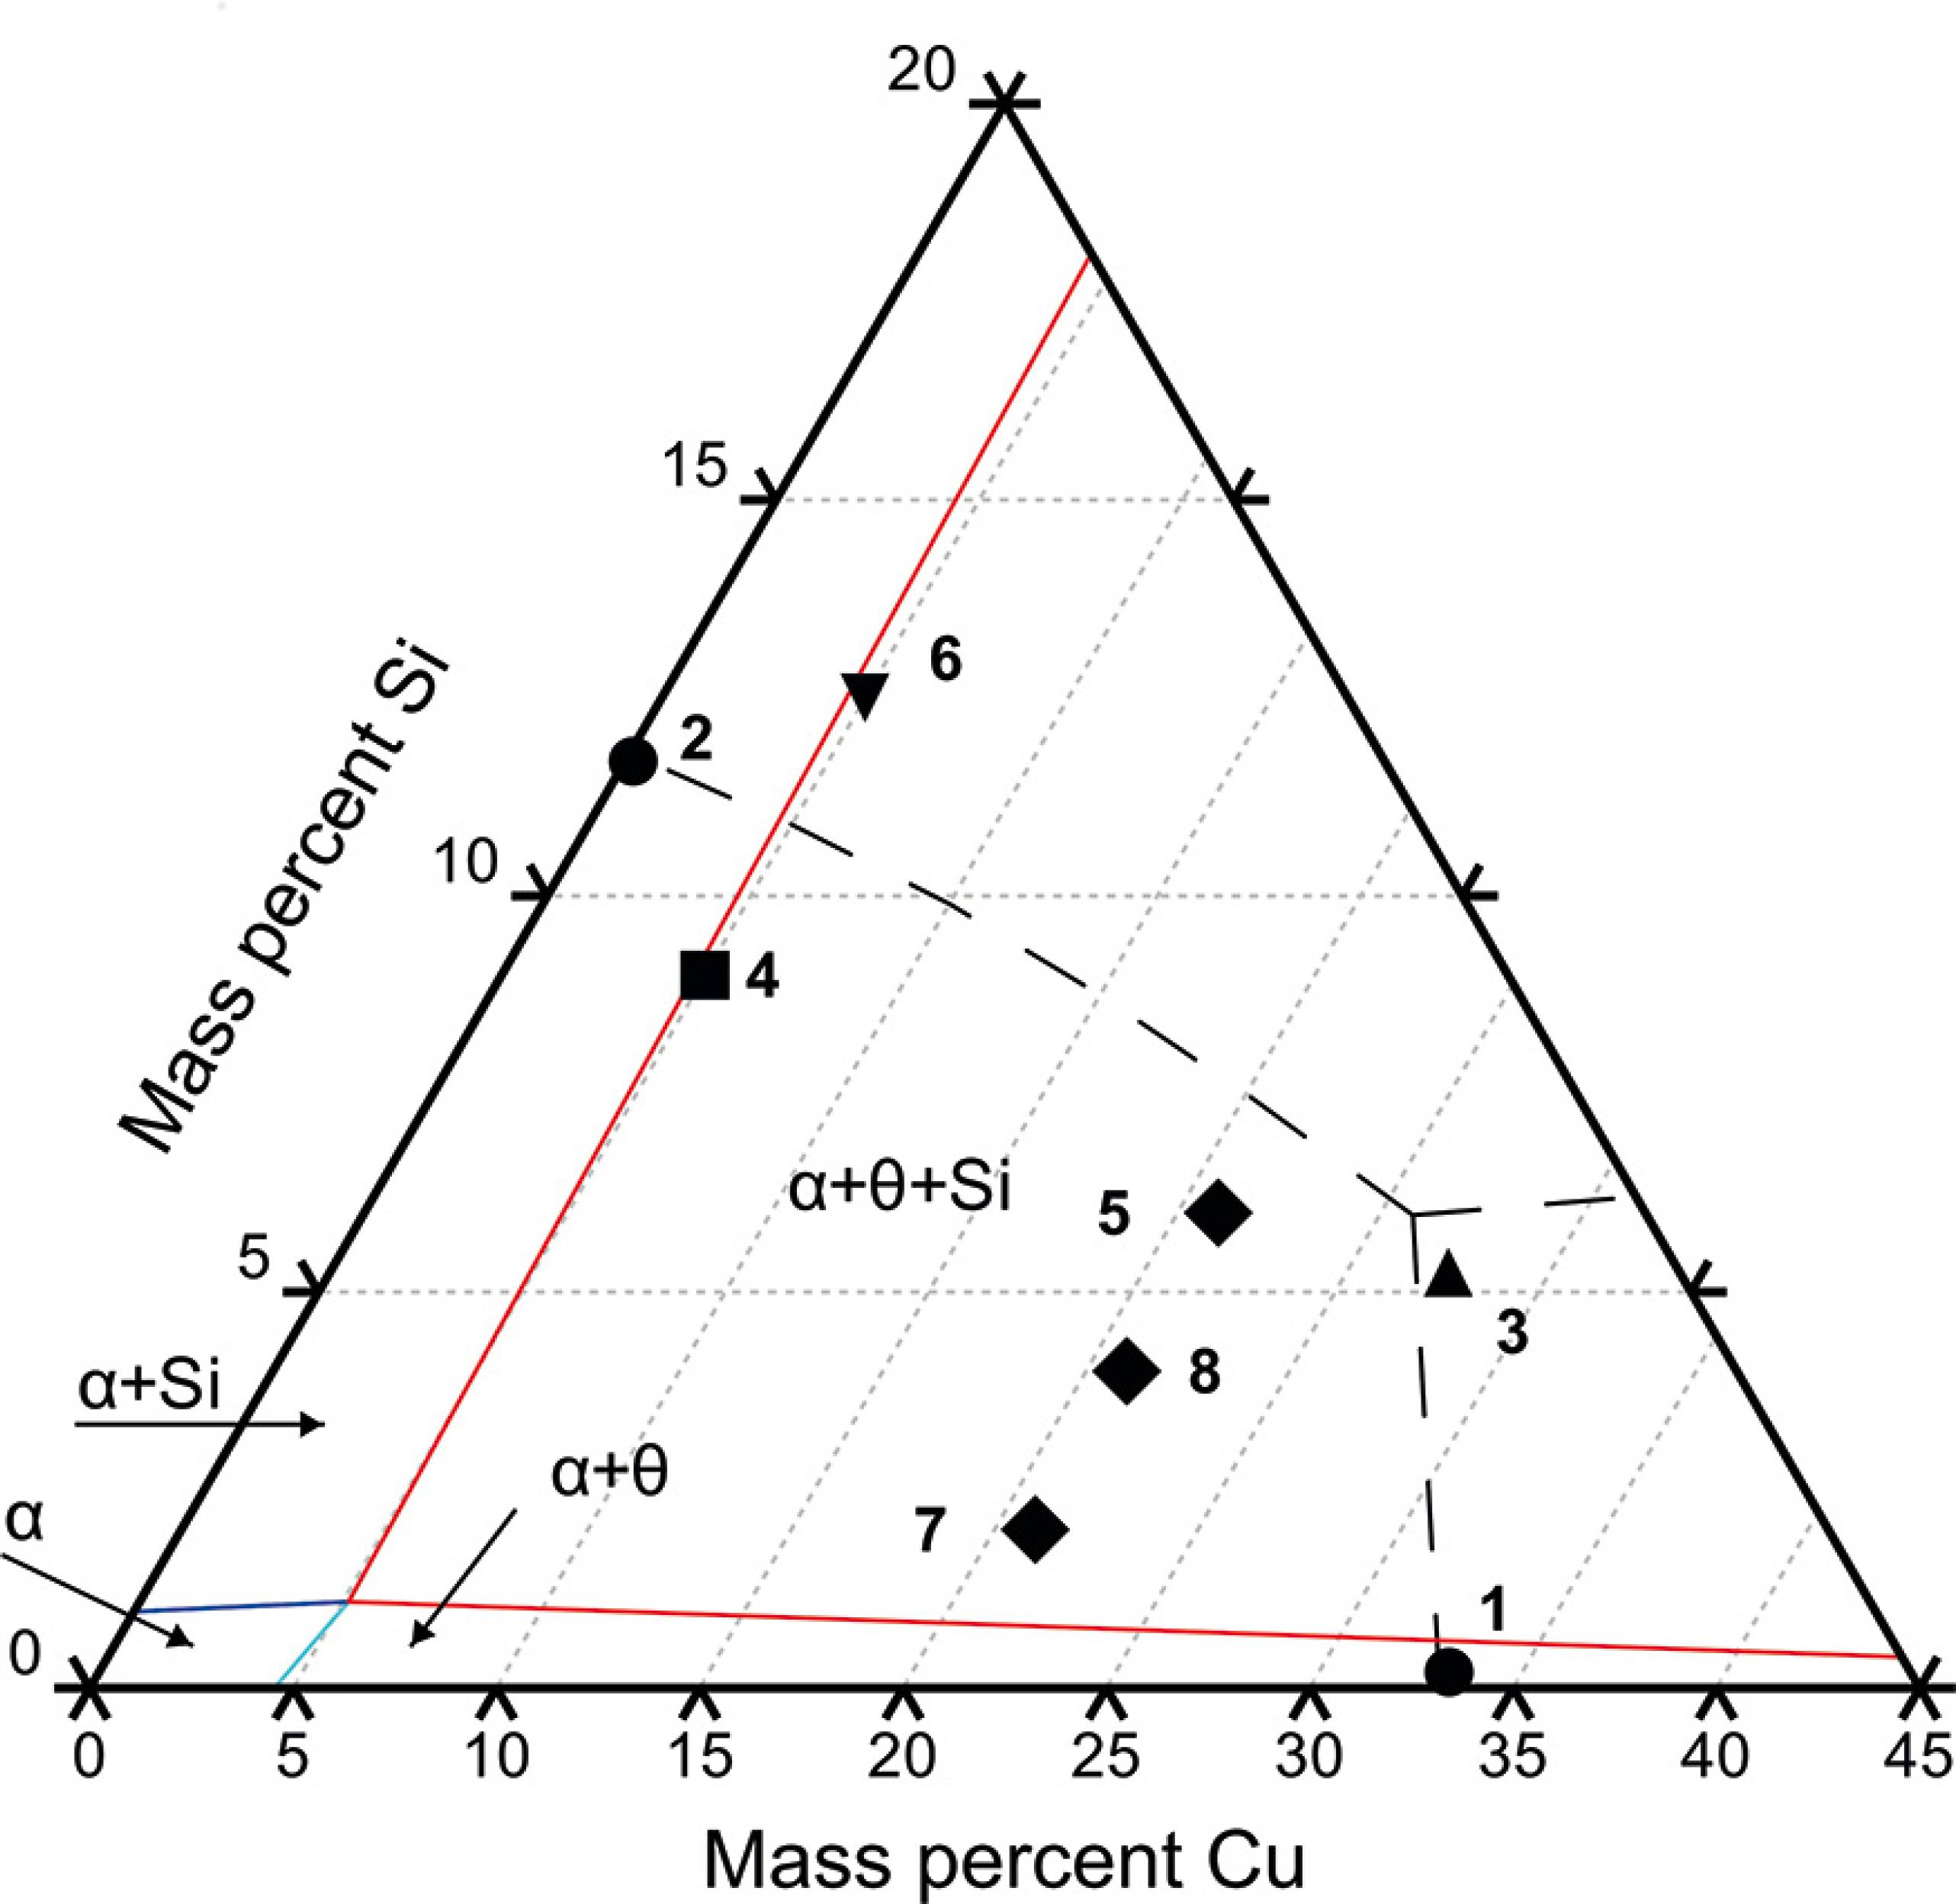 Pb Sn Phase Diagram Morphology And Phase Formation During The Solidification Of Al Cu Si